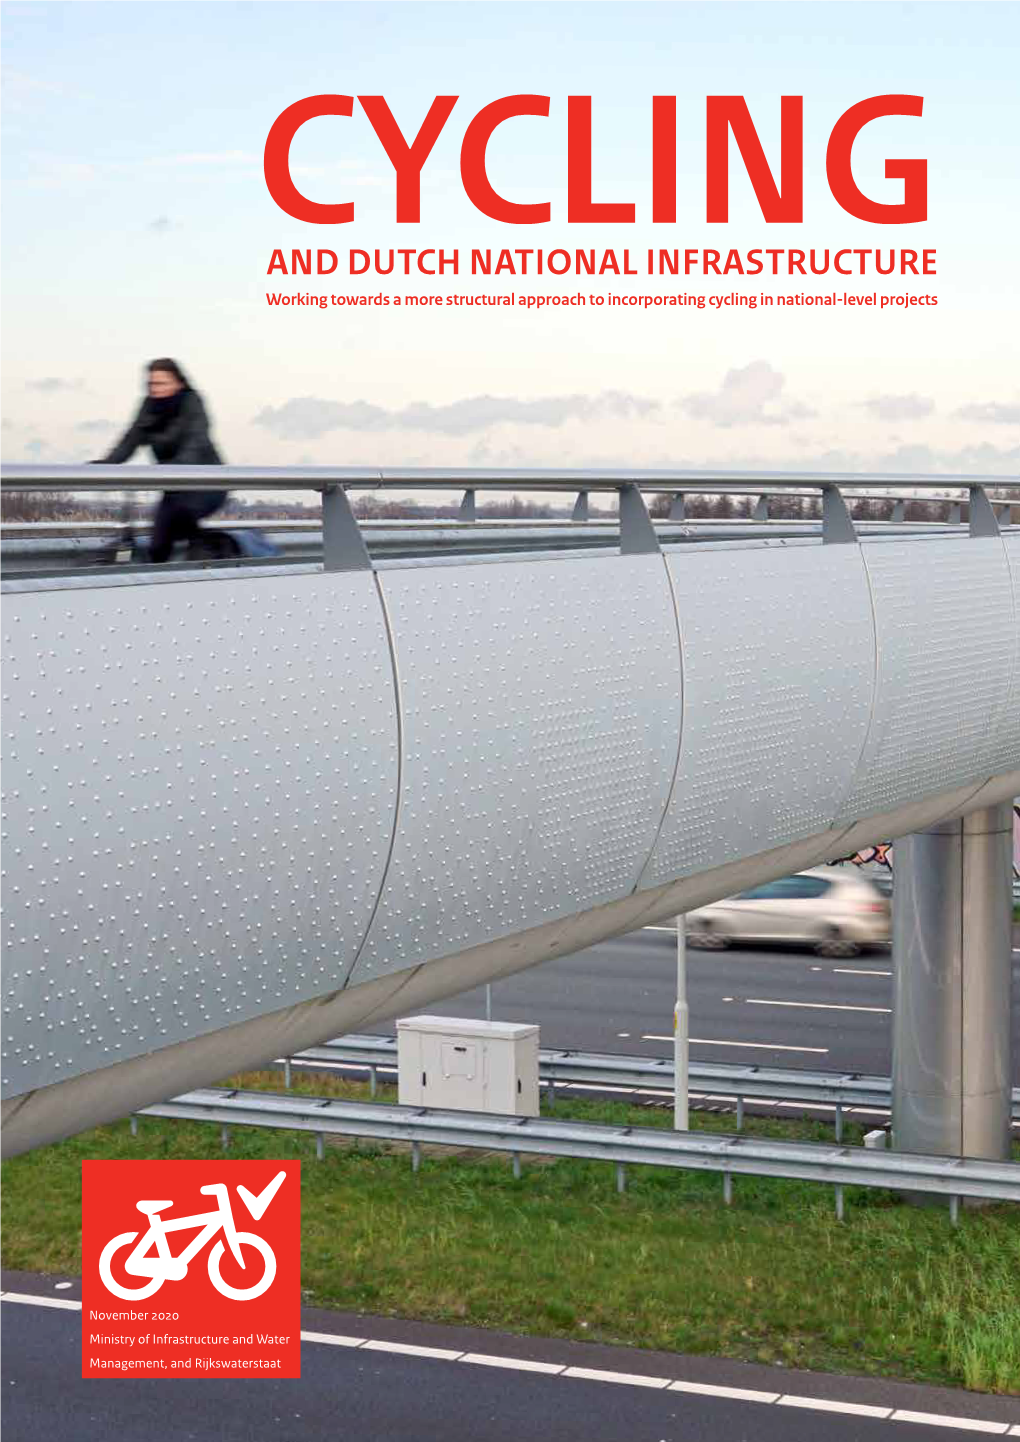 CYCLING and DUTCH NATIONAL INFRASTRUCTURE Working Towards a More Structural Approach to Incorporating Cycling in National-Level Projects